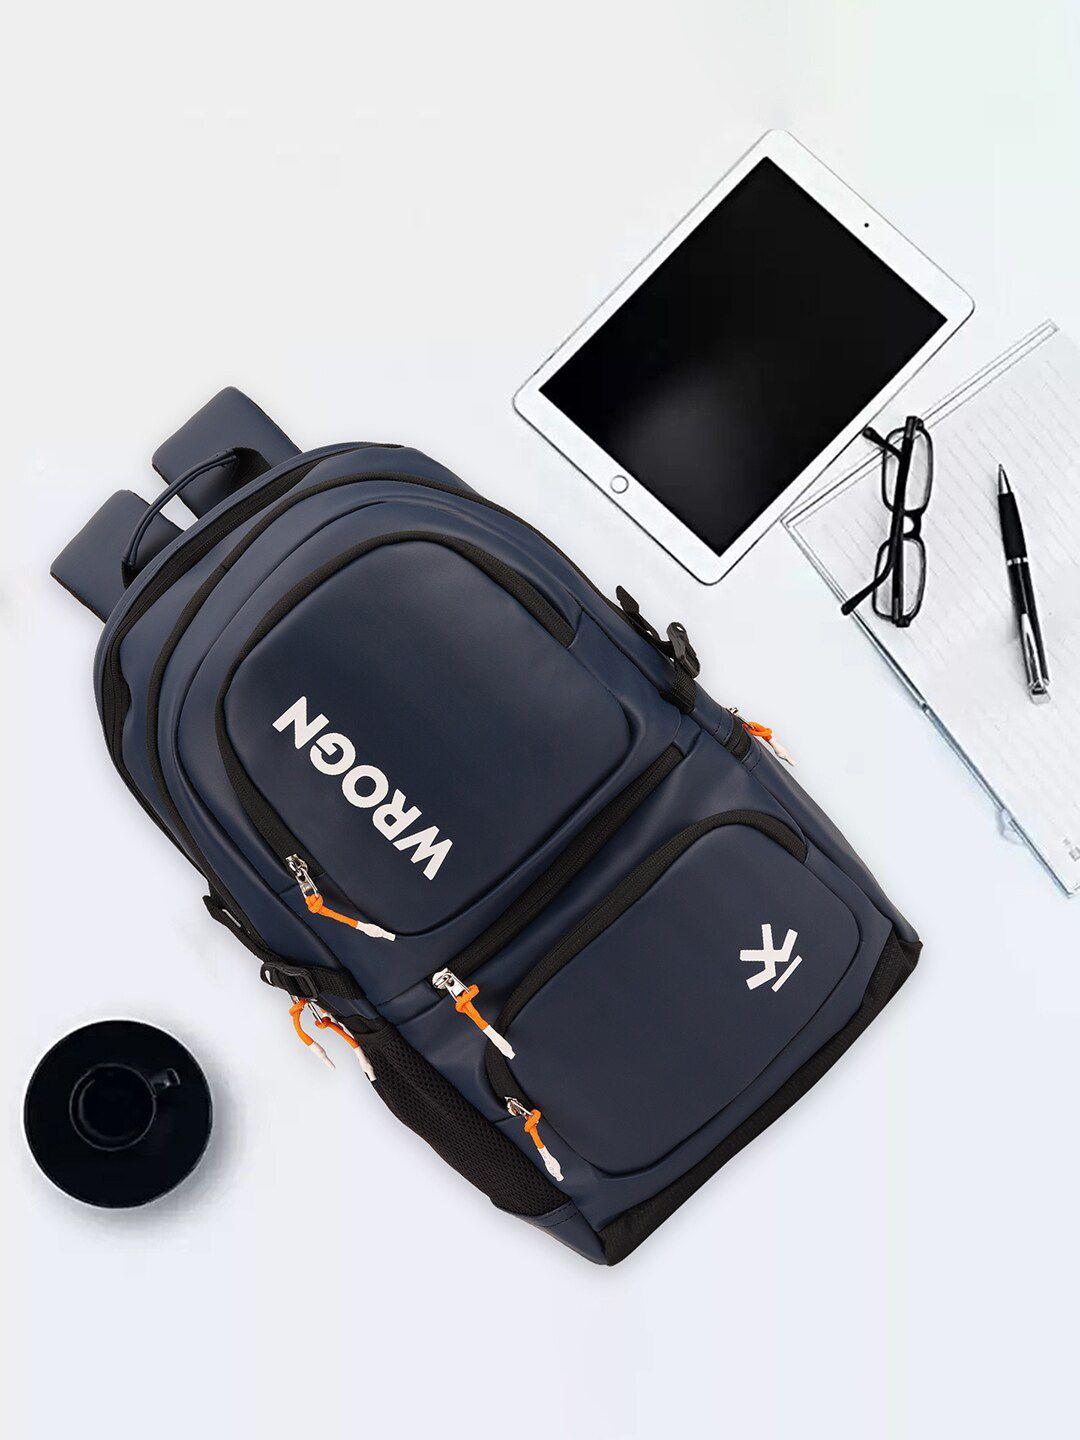 wrogn brand logo printed padded backpack with rain cover